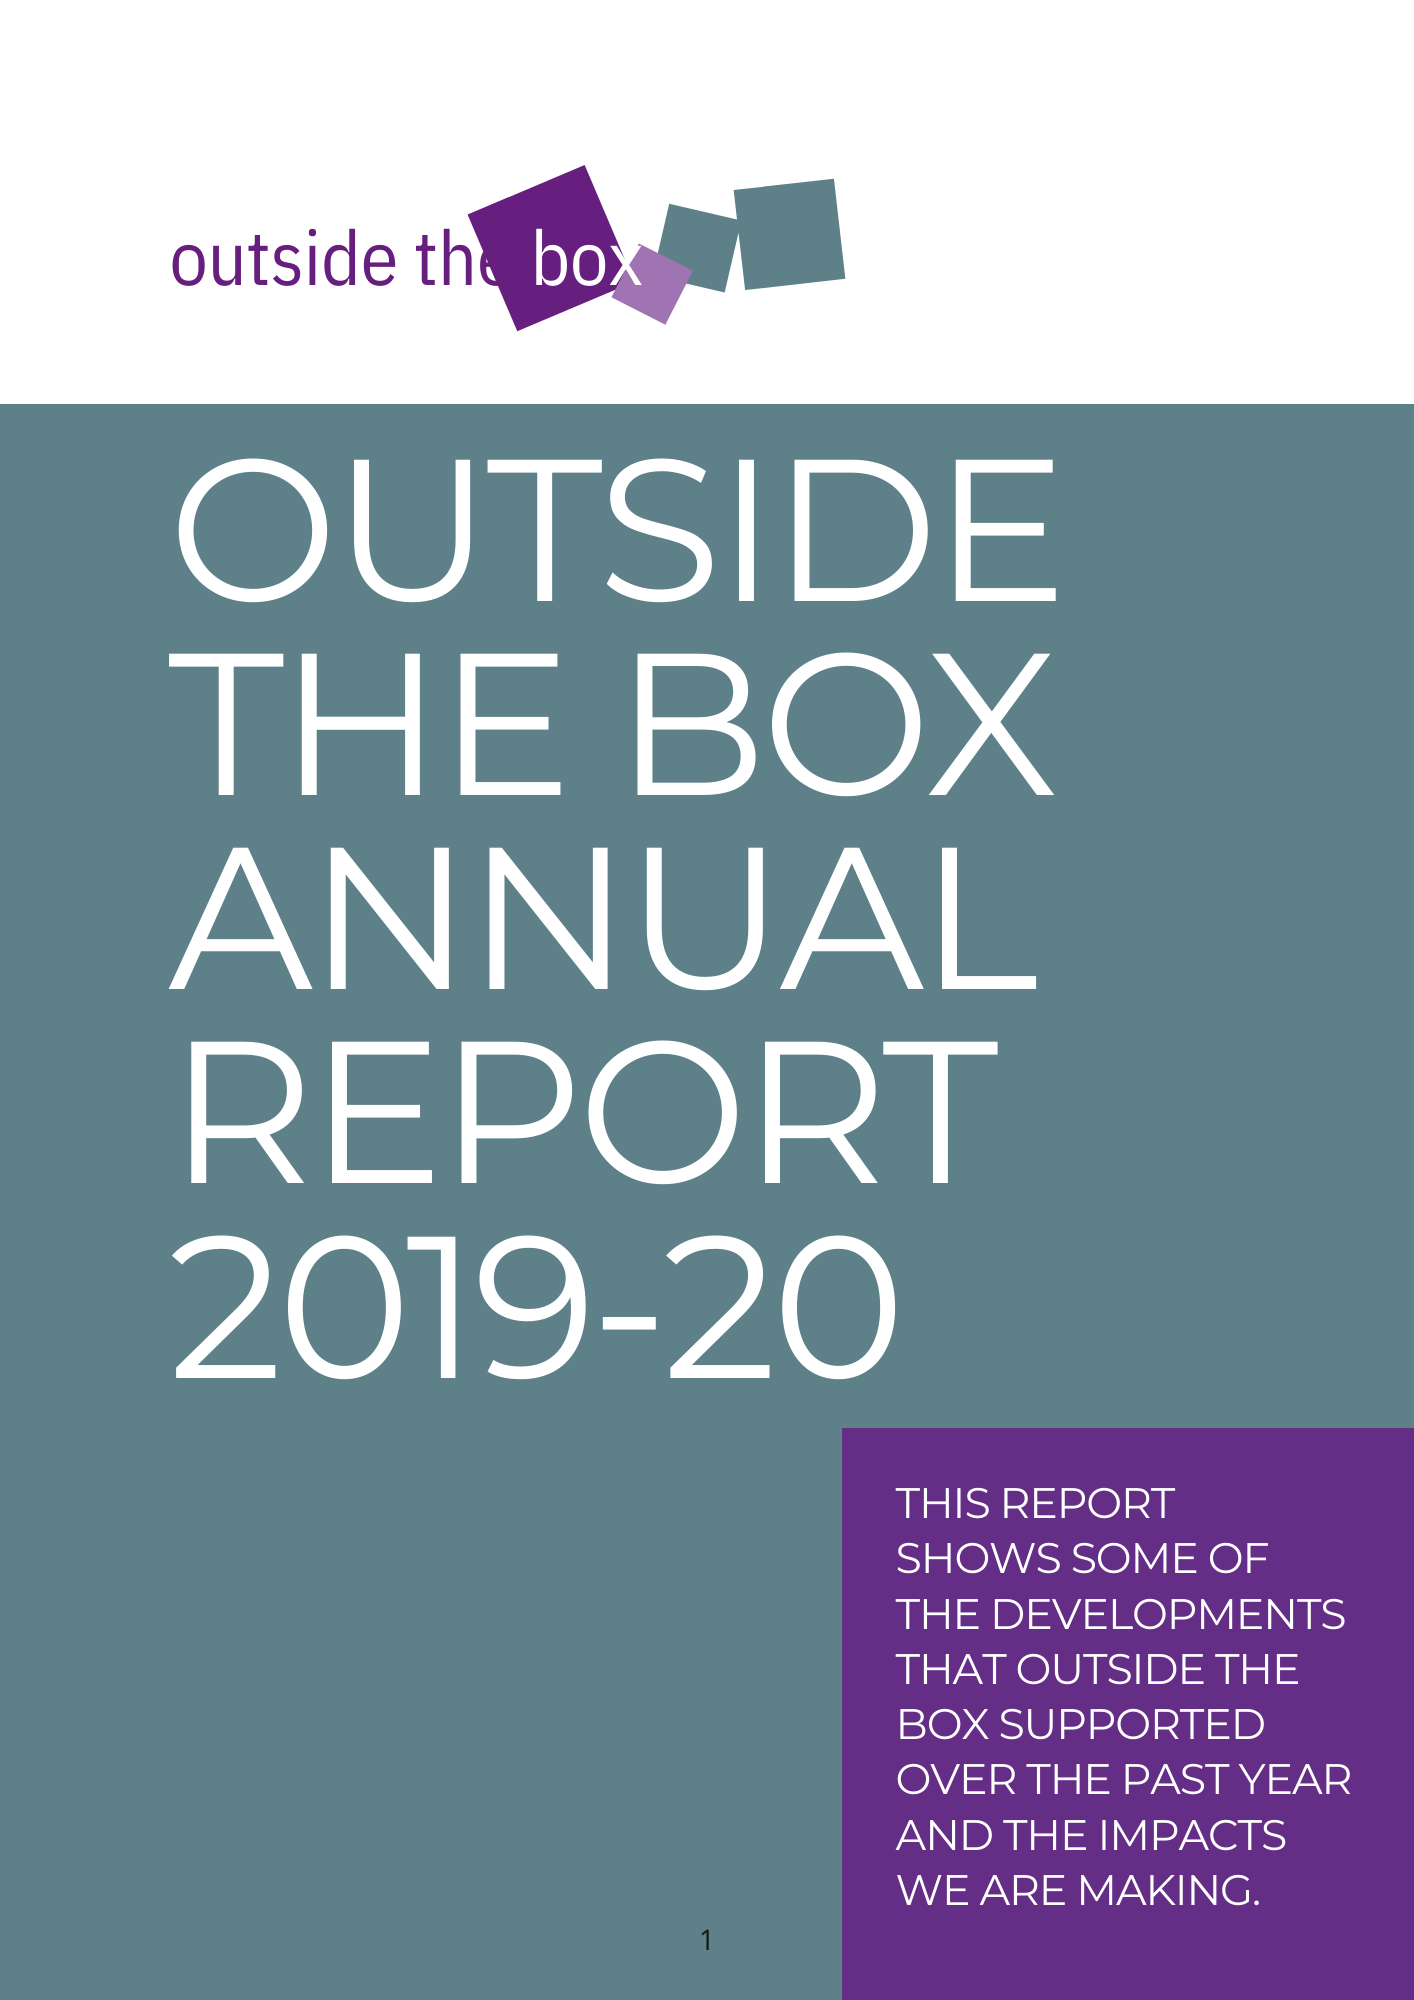 Outside the Box annual report 2019 to 2020. This report shows some of the developments that Outside the Box supported over the past year and the impacts we are making.